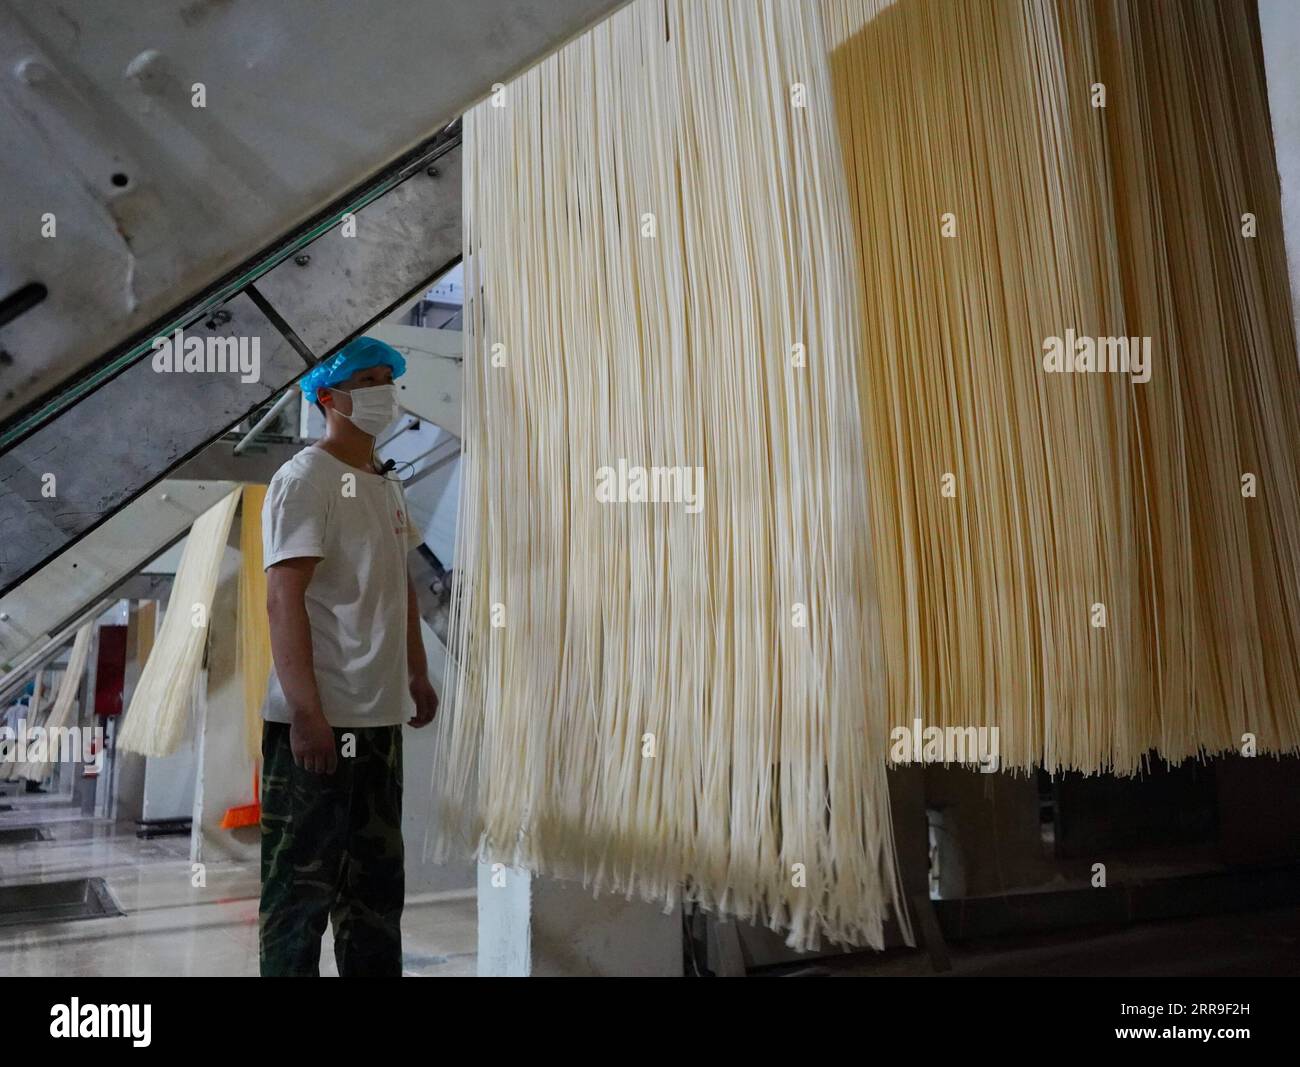 210613 -- XINGTAI, June 13, 2021 -- A staff member works on the production line of a local noodle factory in Xingtai, north China s Hebei Province, June 9, 2021. With the summer wheat harvest underway, farmers in north China s Xingtai have been busy in the fields to reap the year s premium grains. In Xingtai, a total of 65 farmers have joined the Jinshahe specialized cooperative that provides them with technical guidance in crop harvesting. The cooperative will sell freshly harvested crops to a local noodle factory where staple products are made and sold to customers.  CHINA-HEBEI-XINGTAI-WHEA Stock Photo